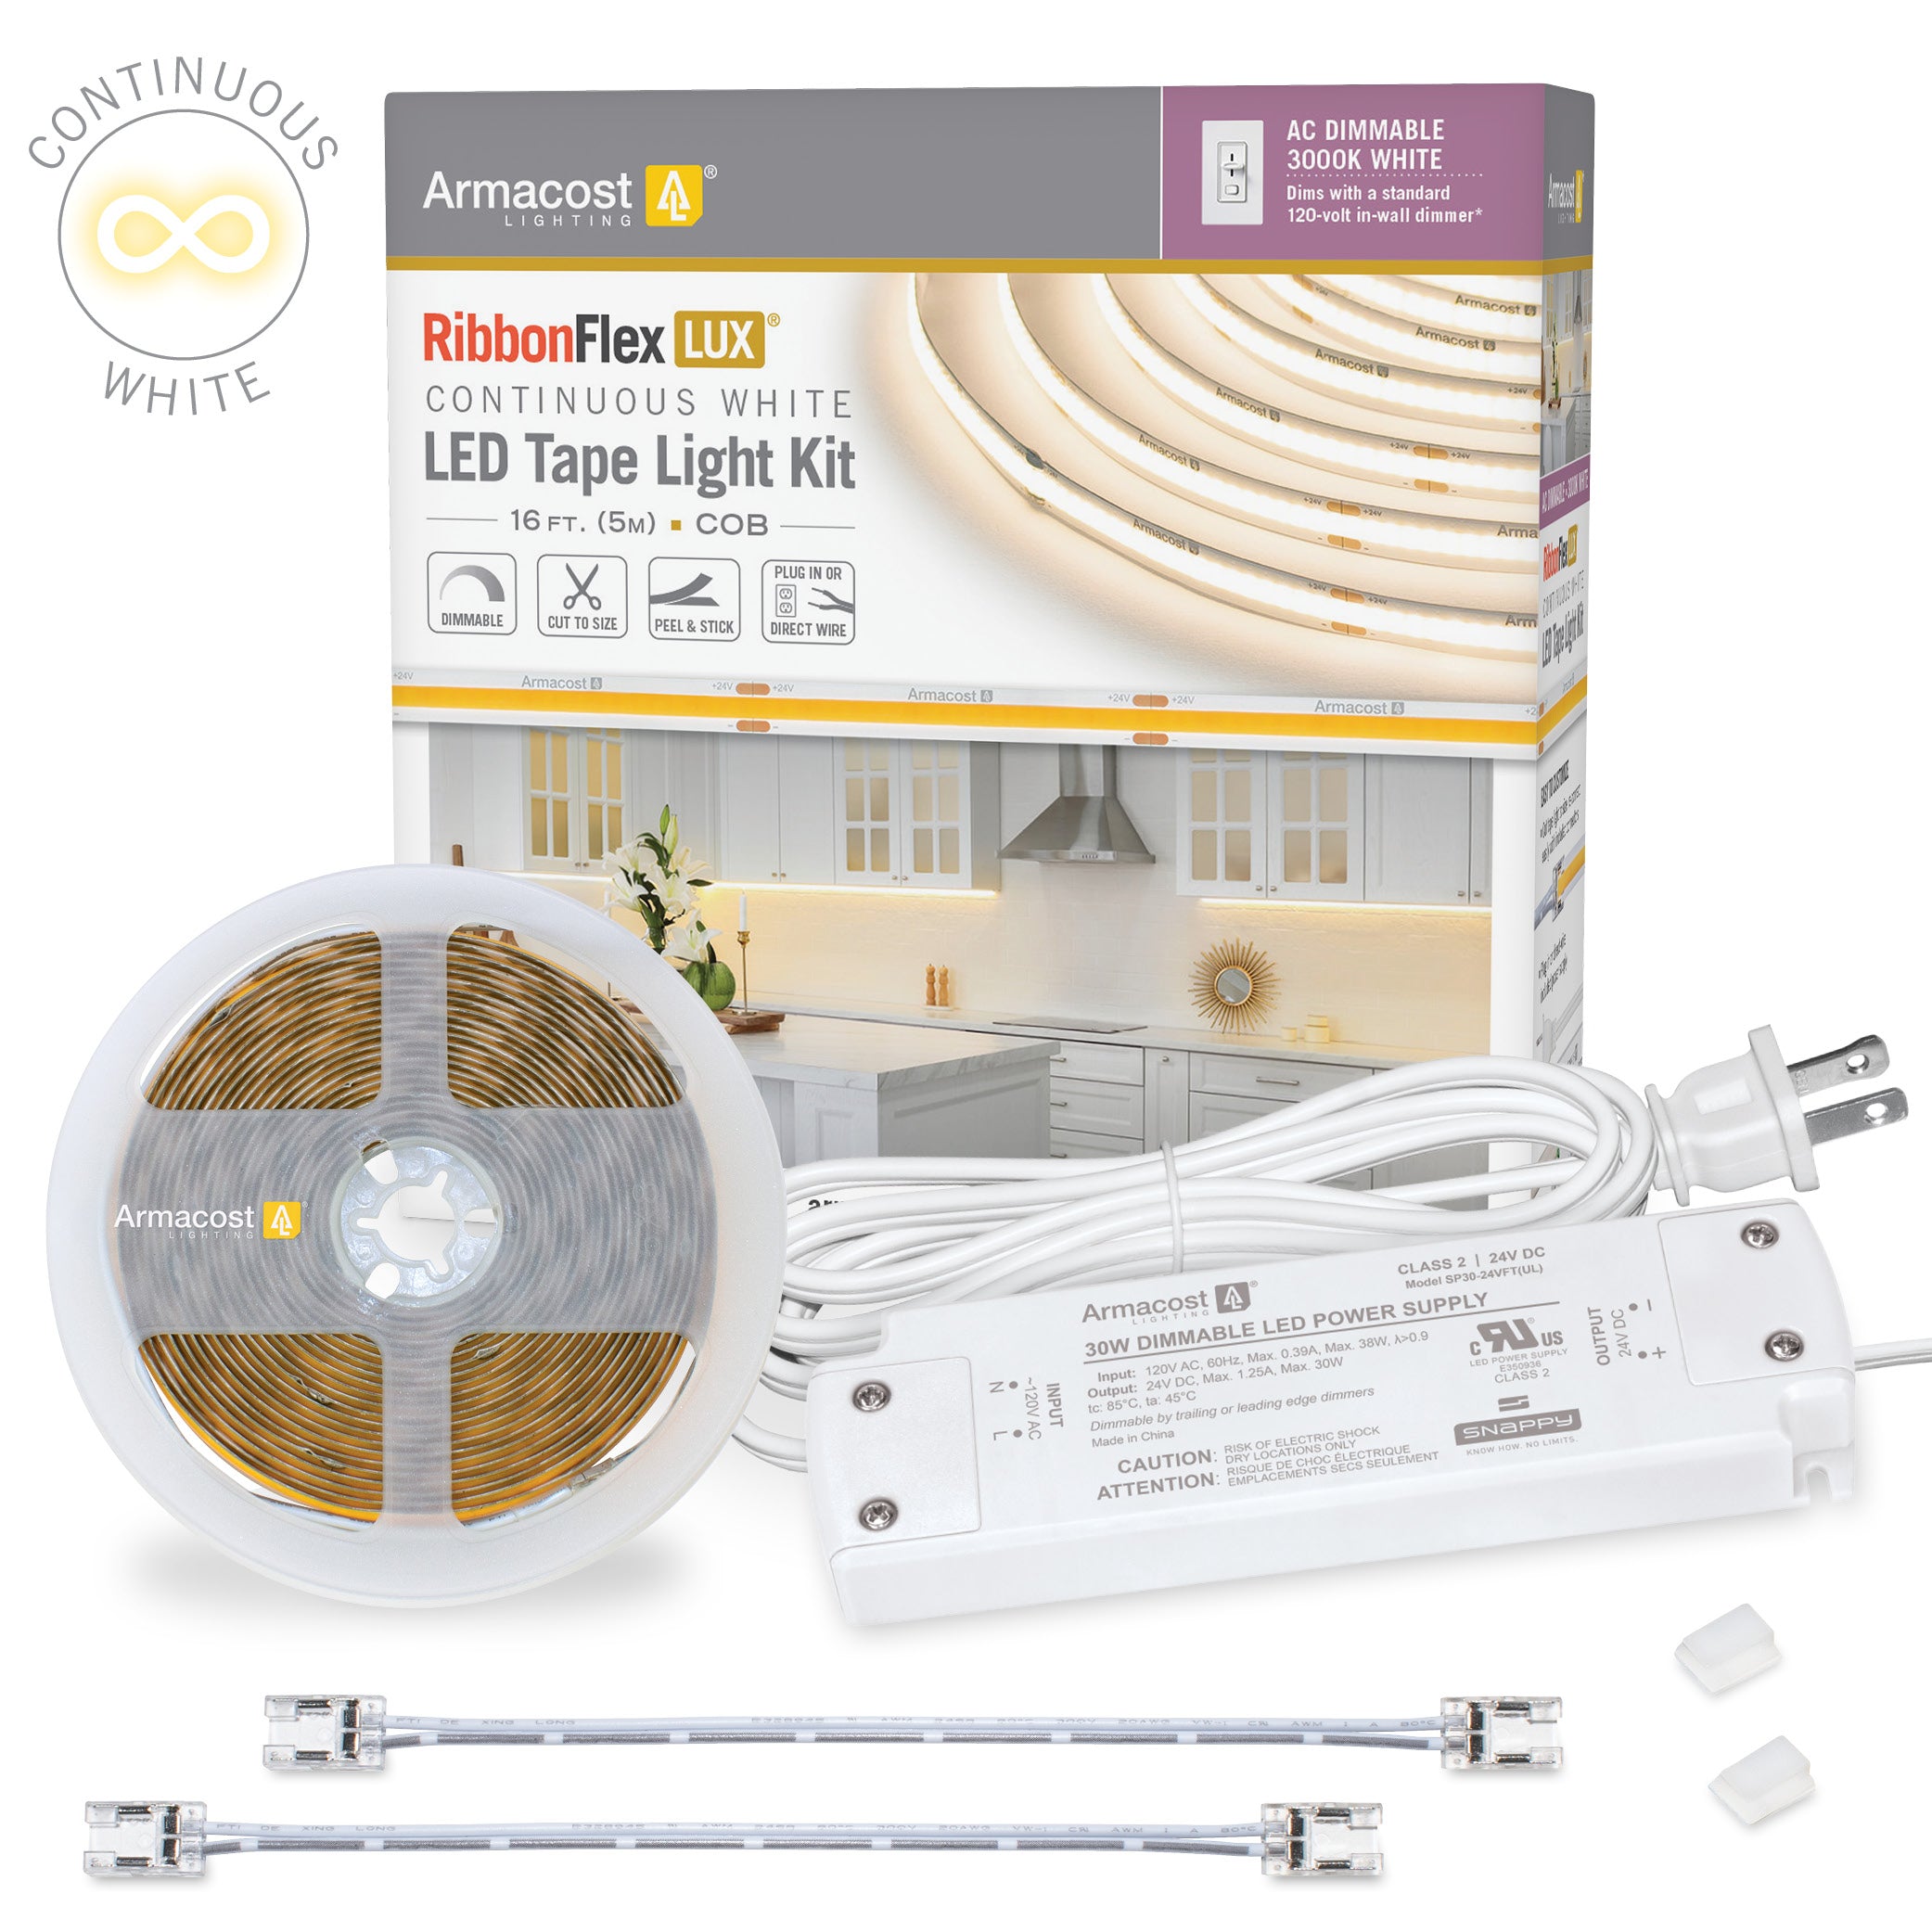 RibbonFlex LUX White COB AC Dimmable LED Tape Light Kit – Armacost Lighting